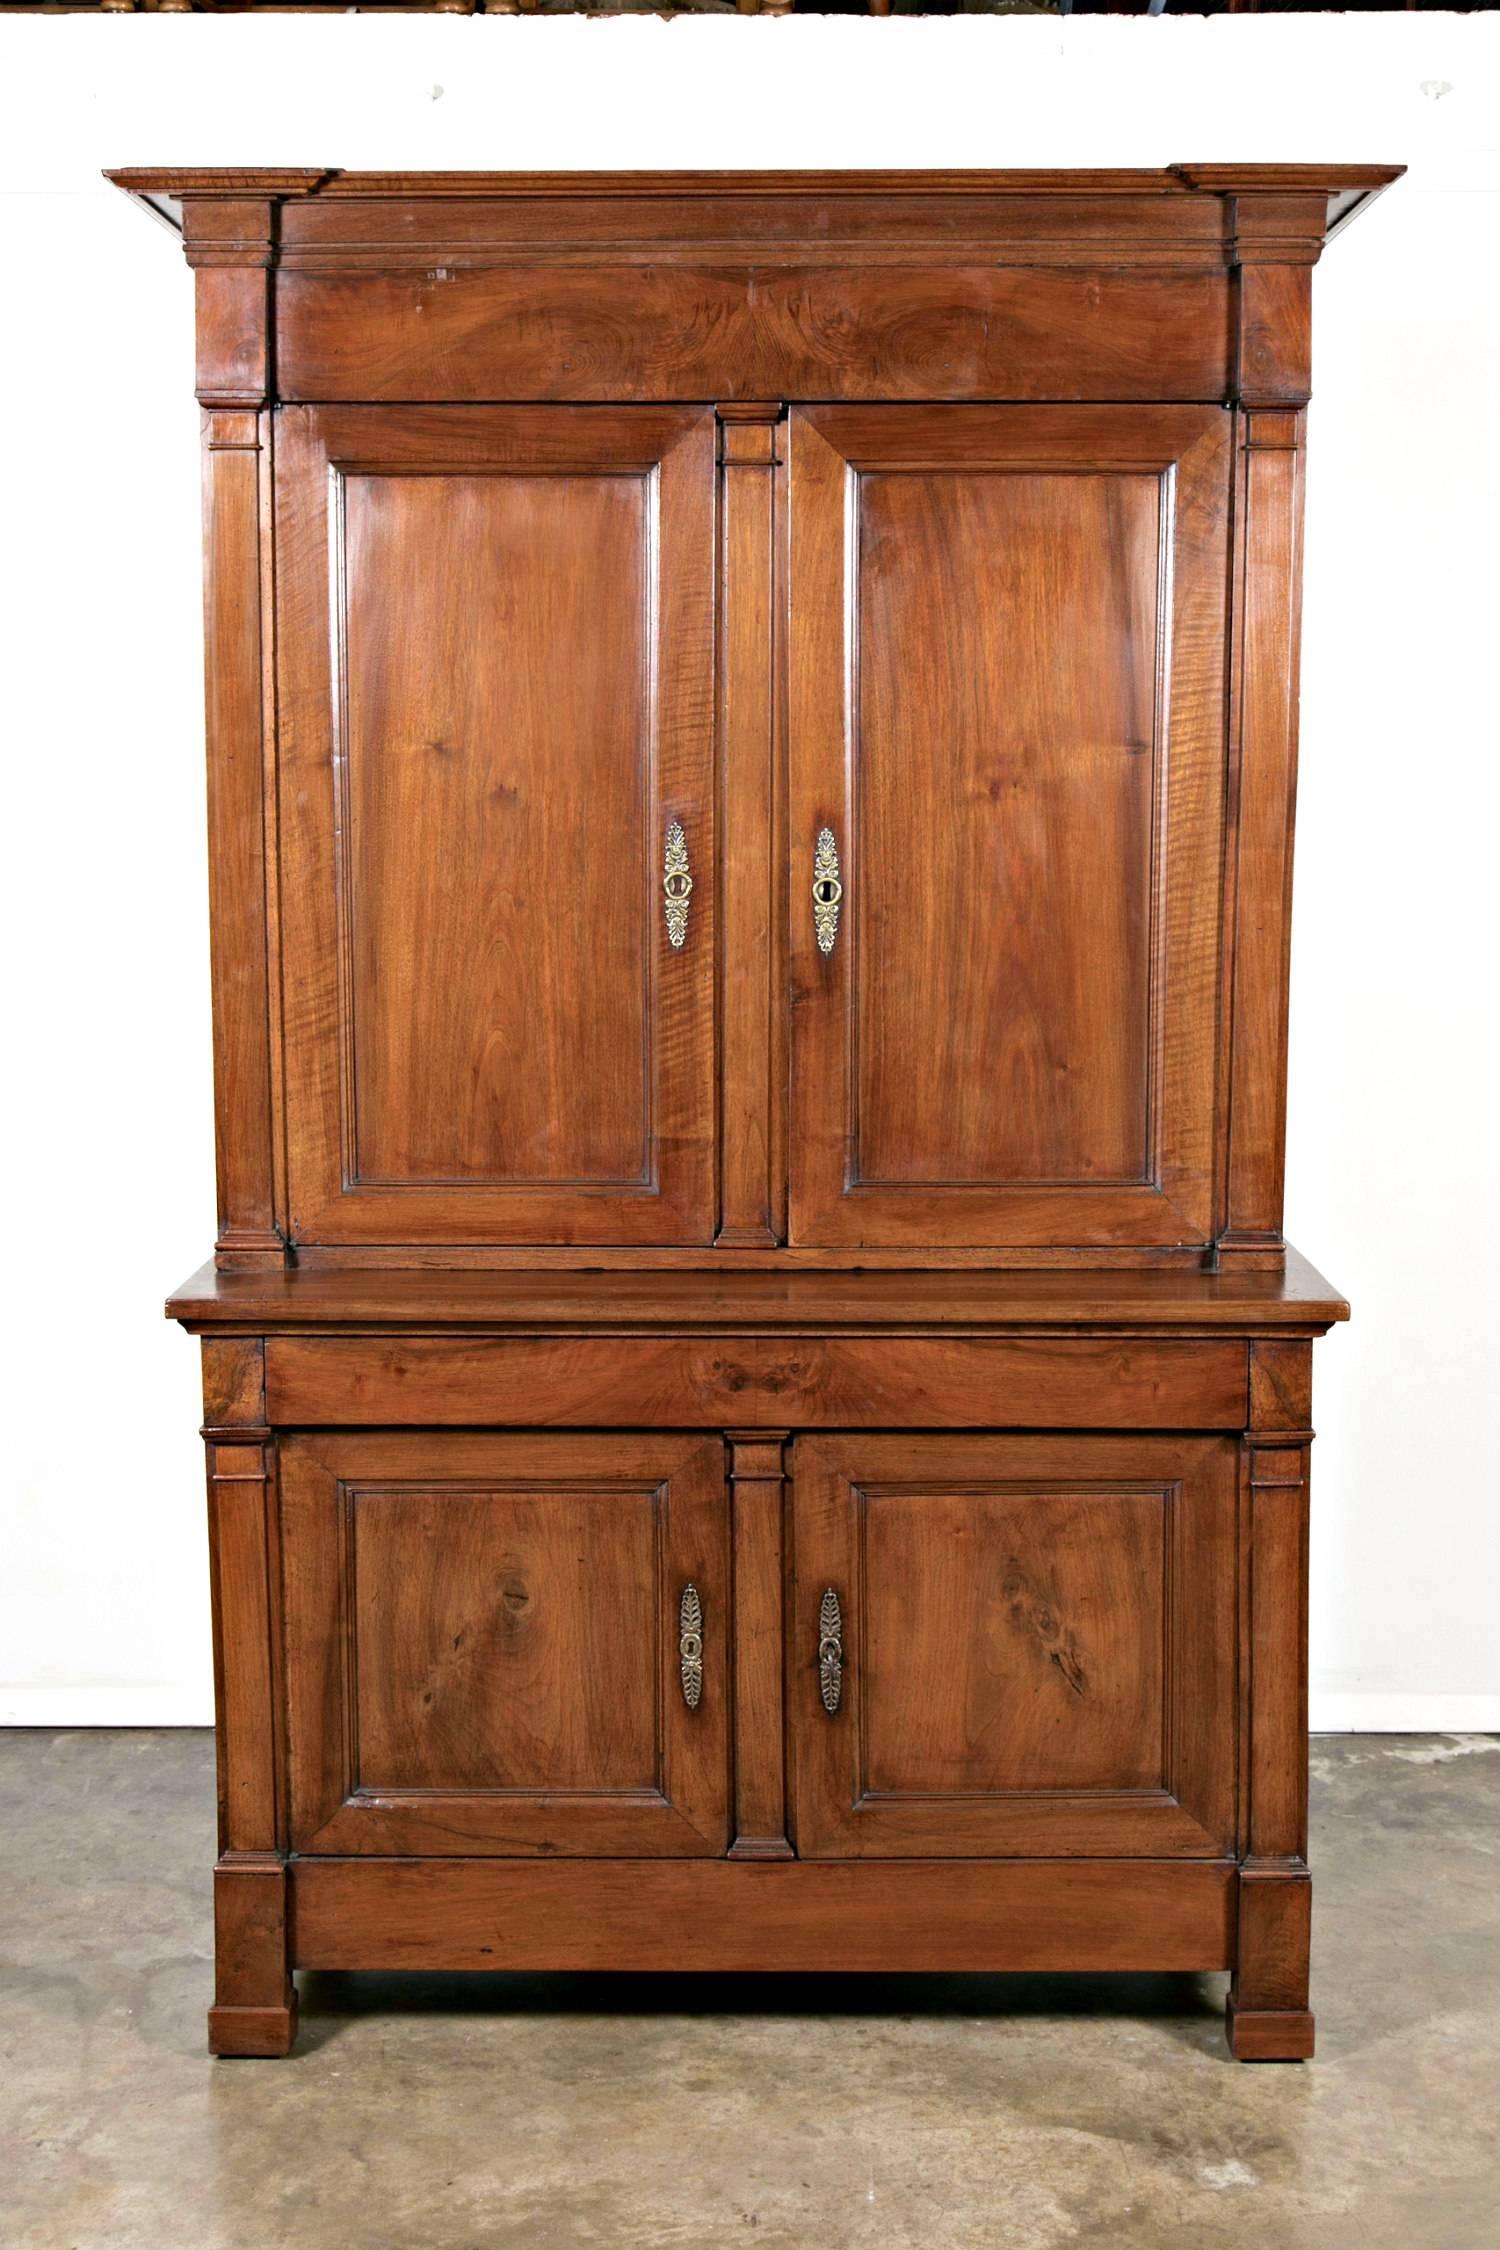 Antique French Directoire period buffet deux corps handcrafted of solid walnut by talented artisans near Bordeaux. Having an upper cabinet with paneled doors flanked by flat pilaster columns that open to reveal three interior shelves, sitting atop a